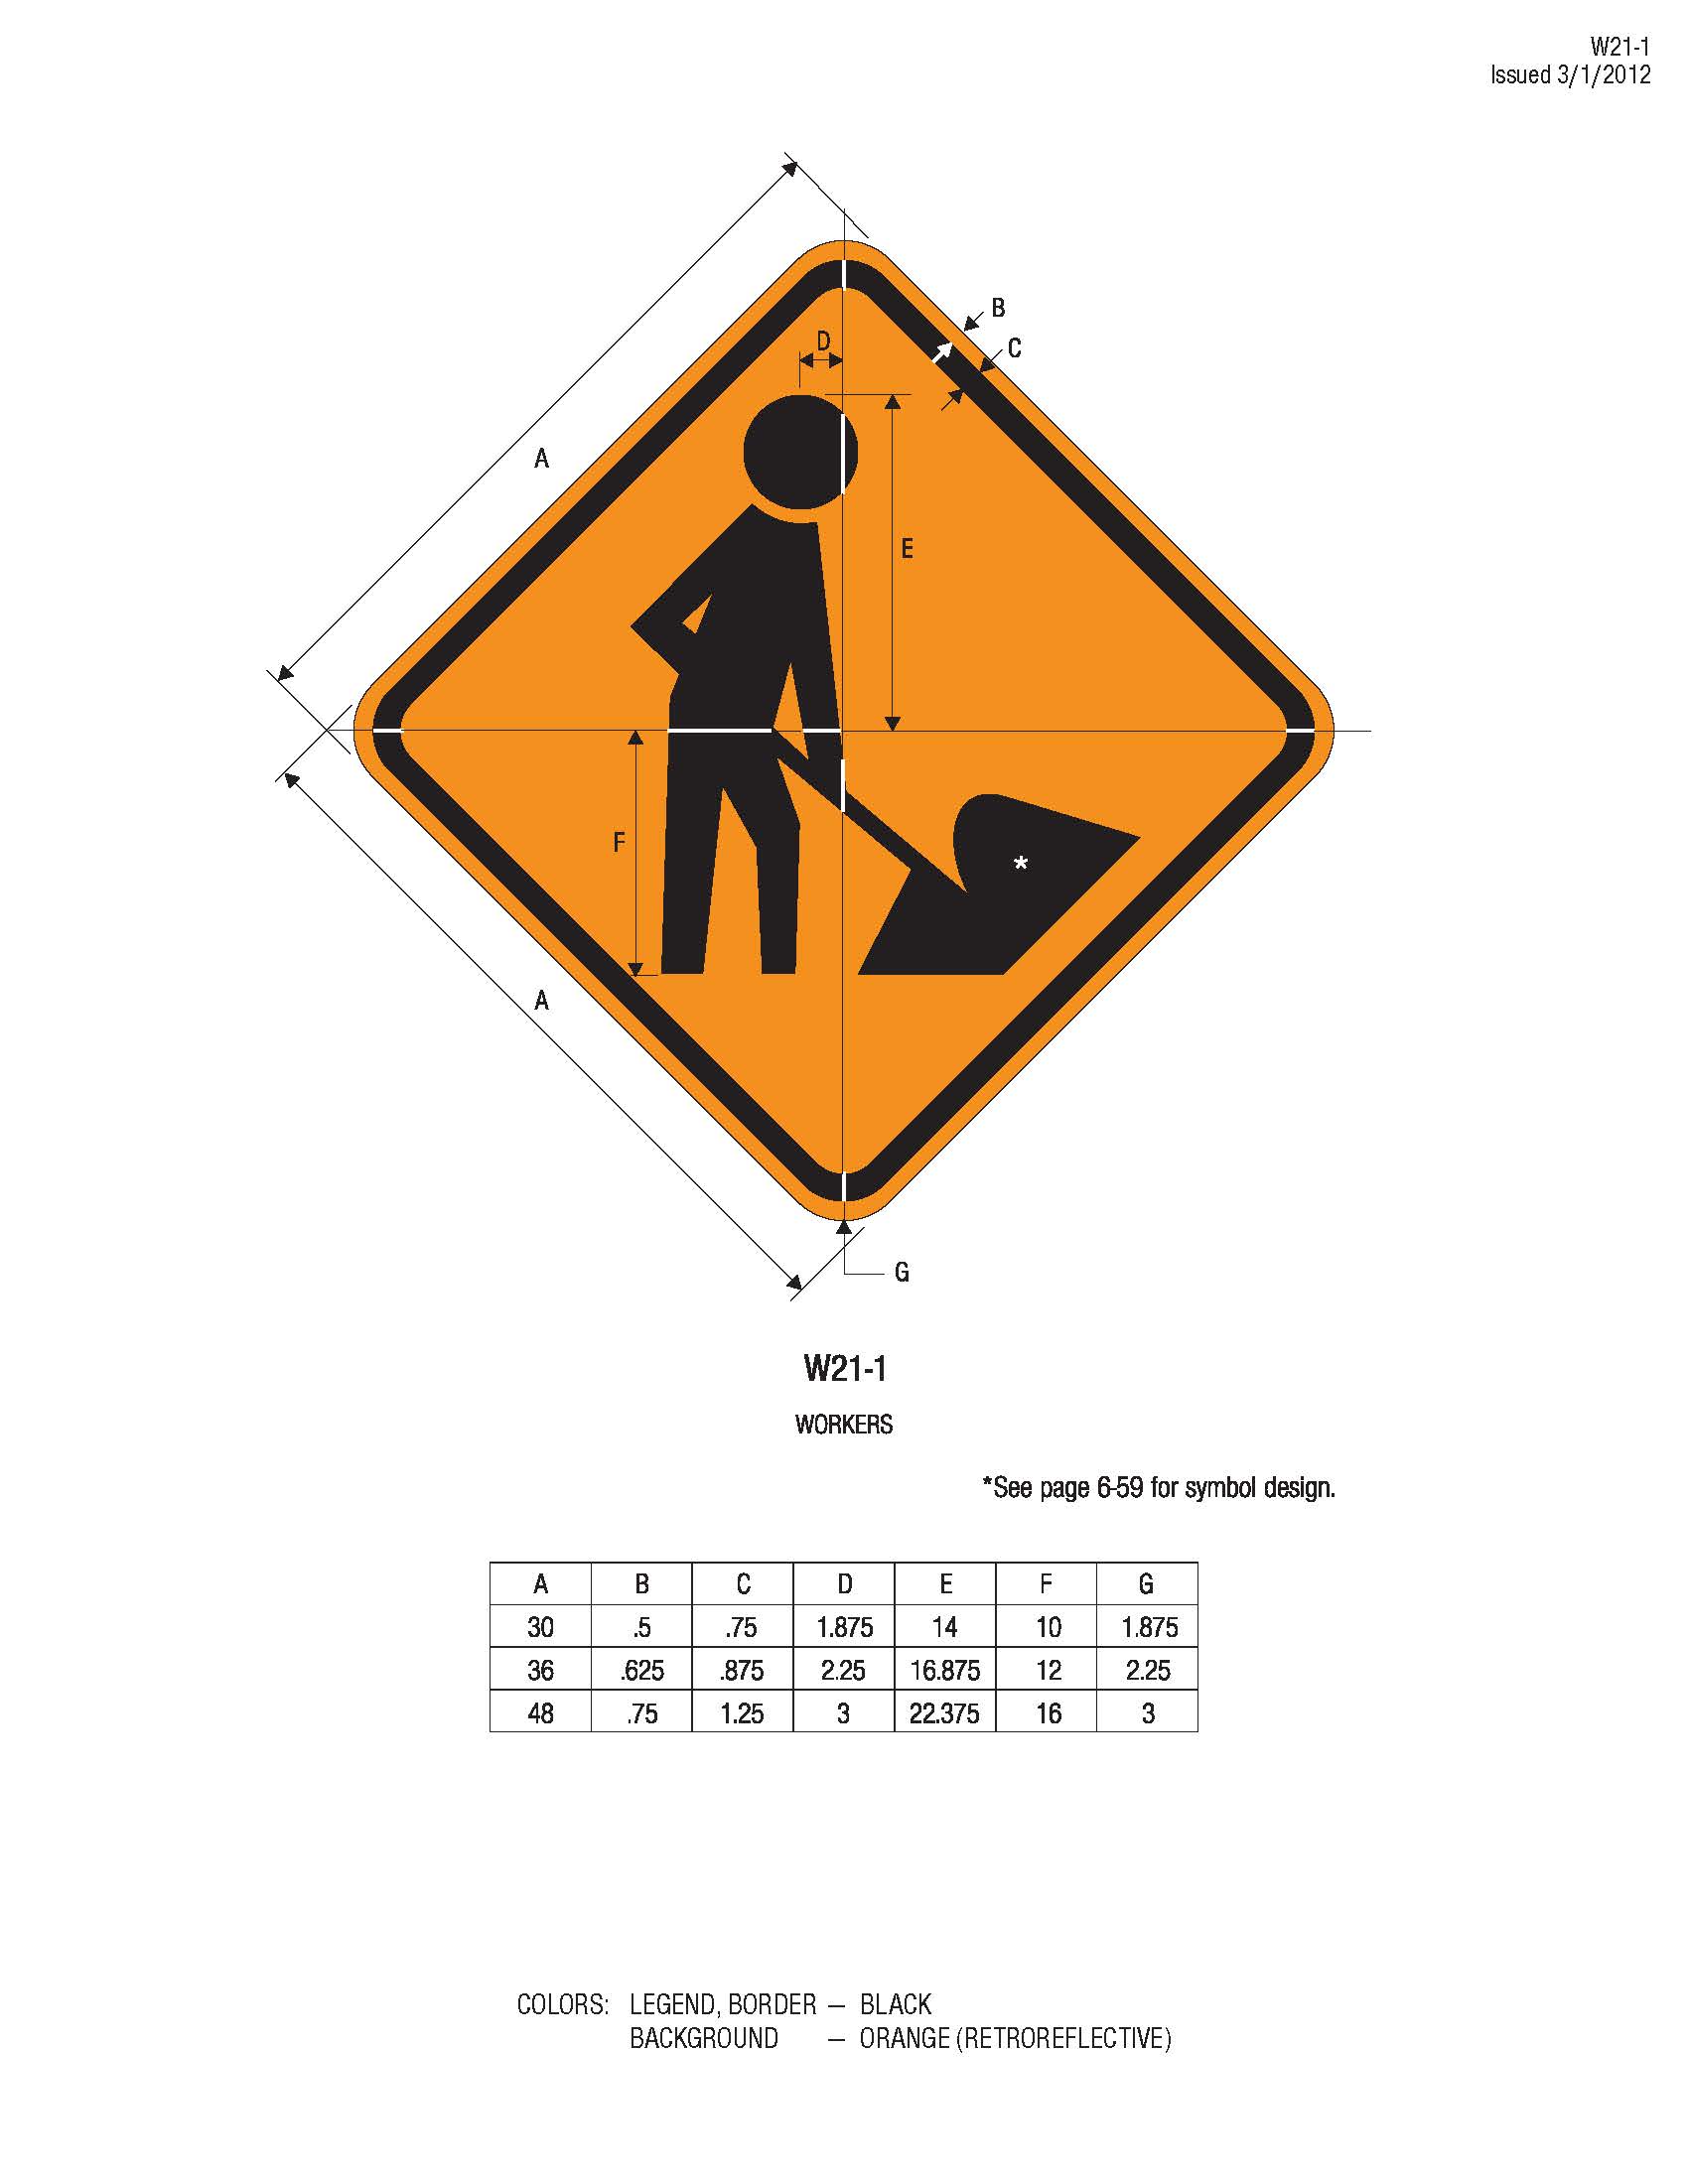 Cross Road Sign W2-1 - Traffic Safety Supply Company